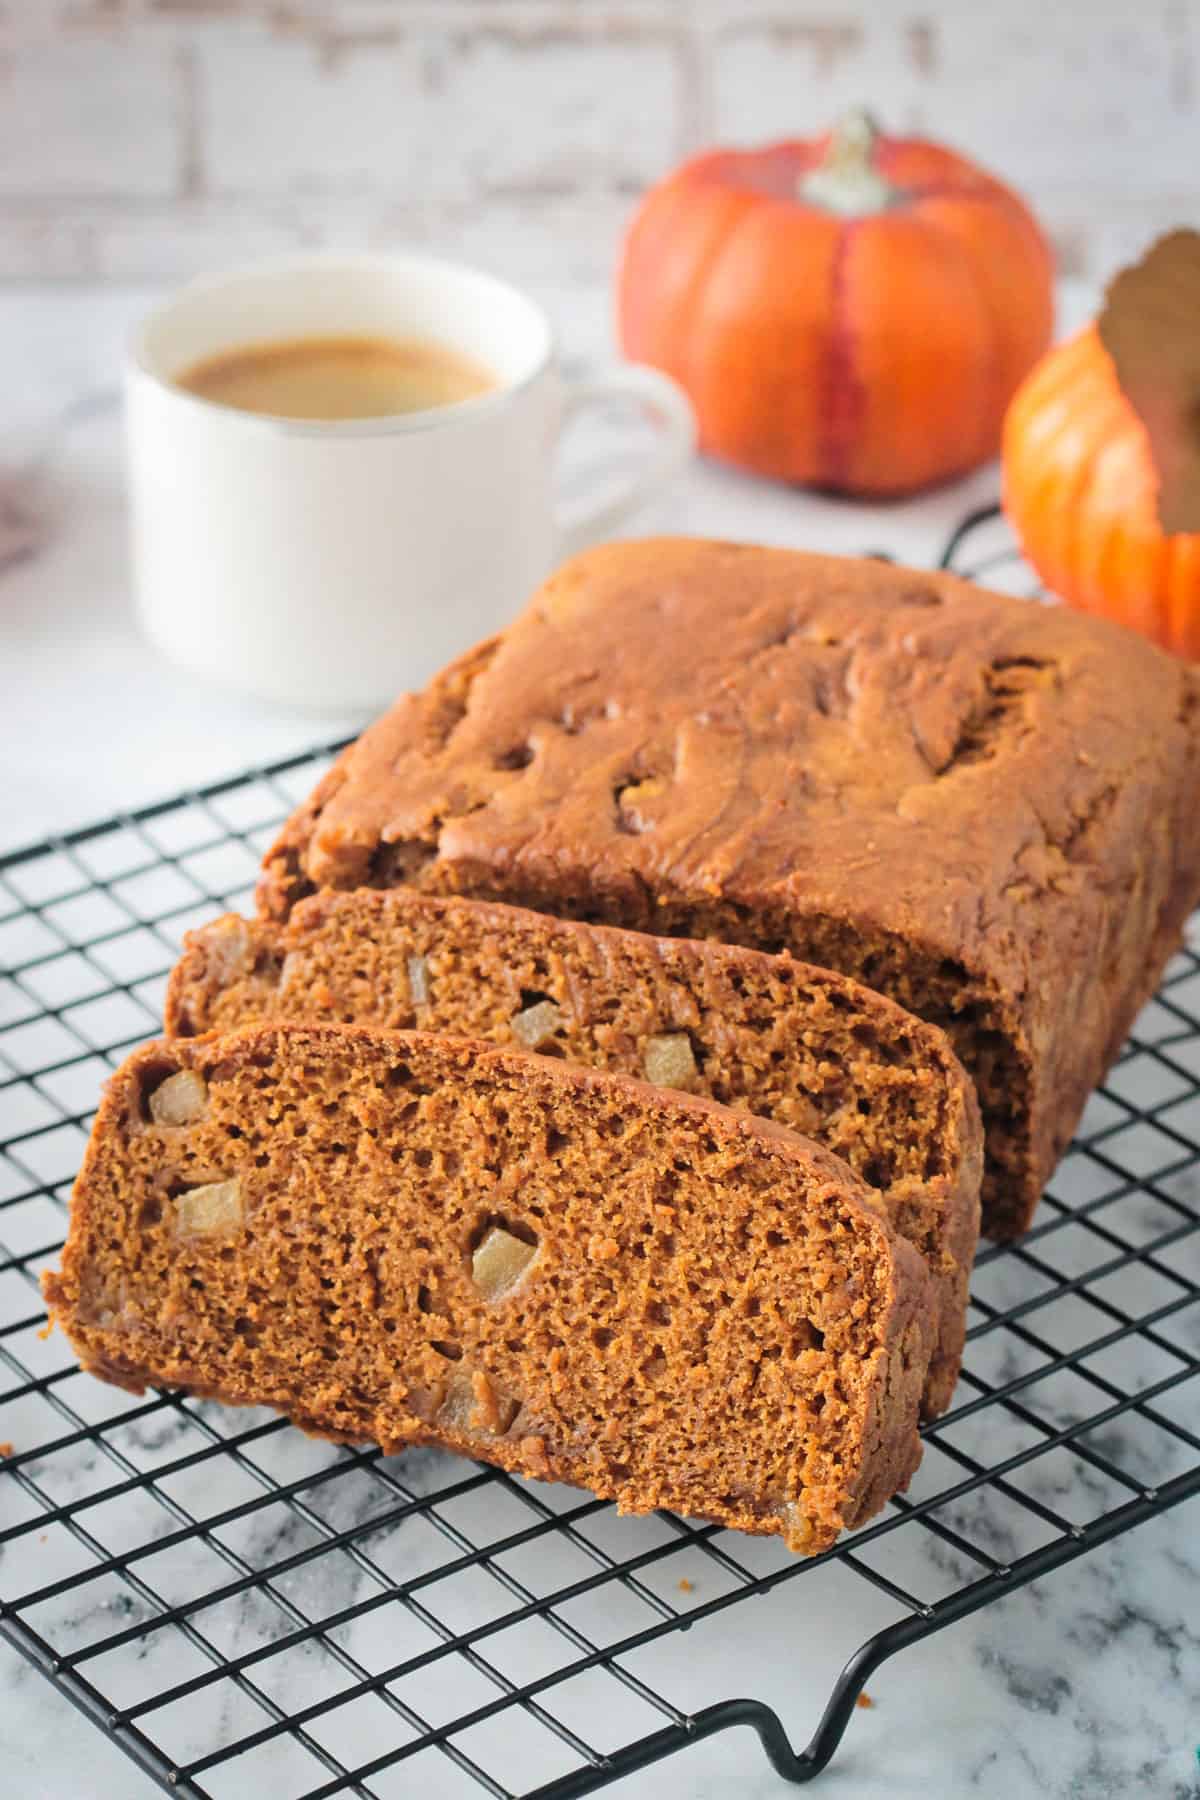 Close up of a slice of pumpkin bread with diced pears.